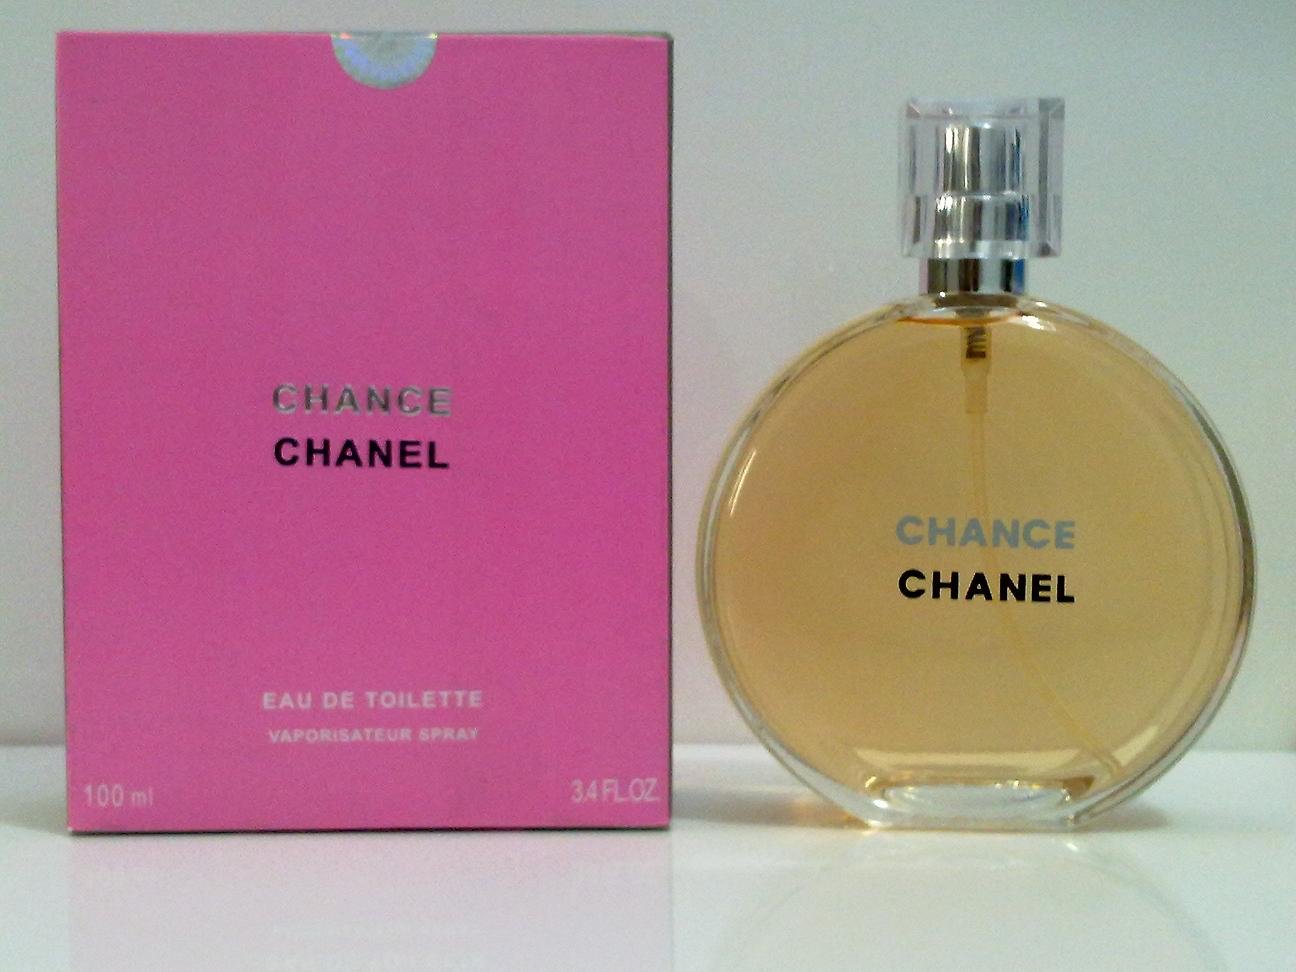 Chanel chance 100ml. Chanel chance Lady 35ml EDT. Chanel chance Lady 50ml EDP. Chanel chance 50 ml. Chanel chance EDT 100 ml.